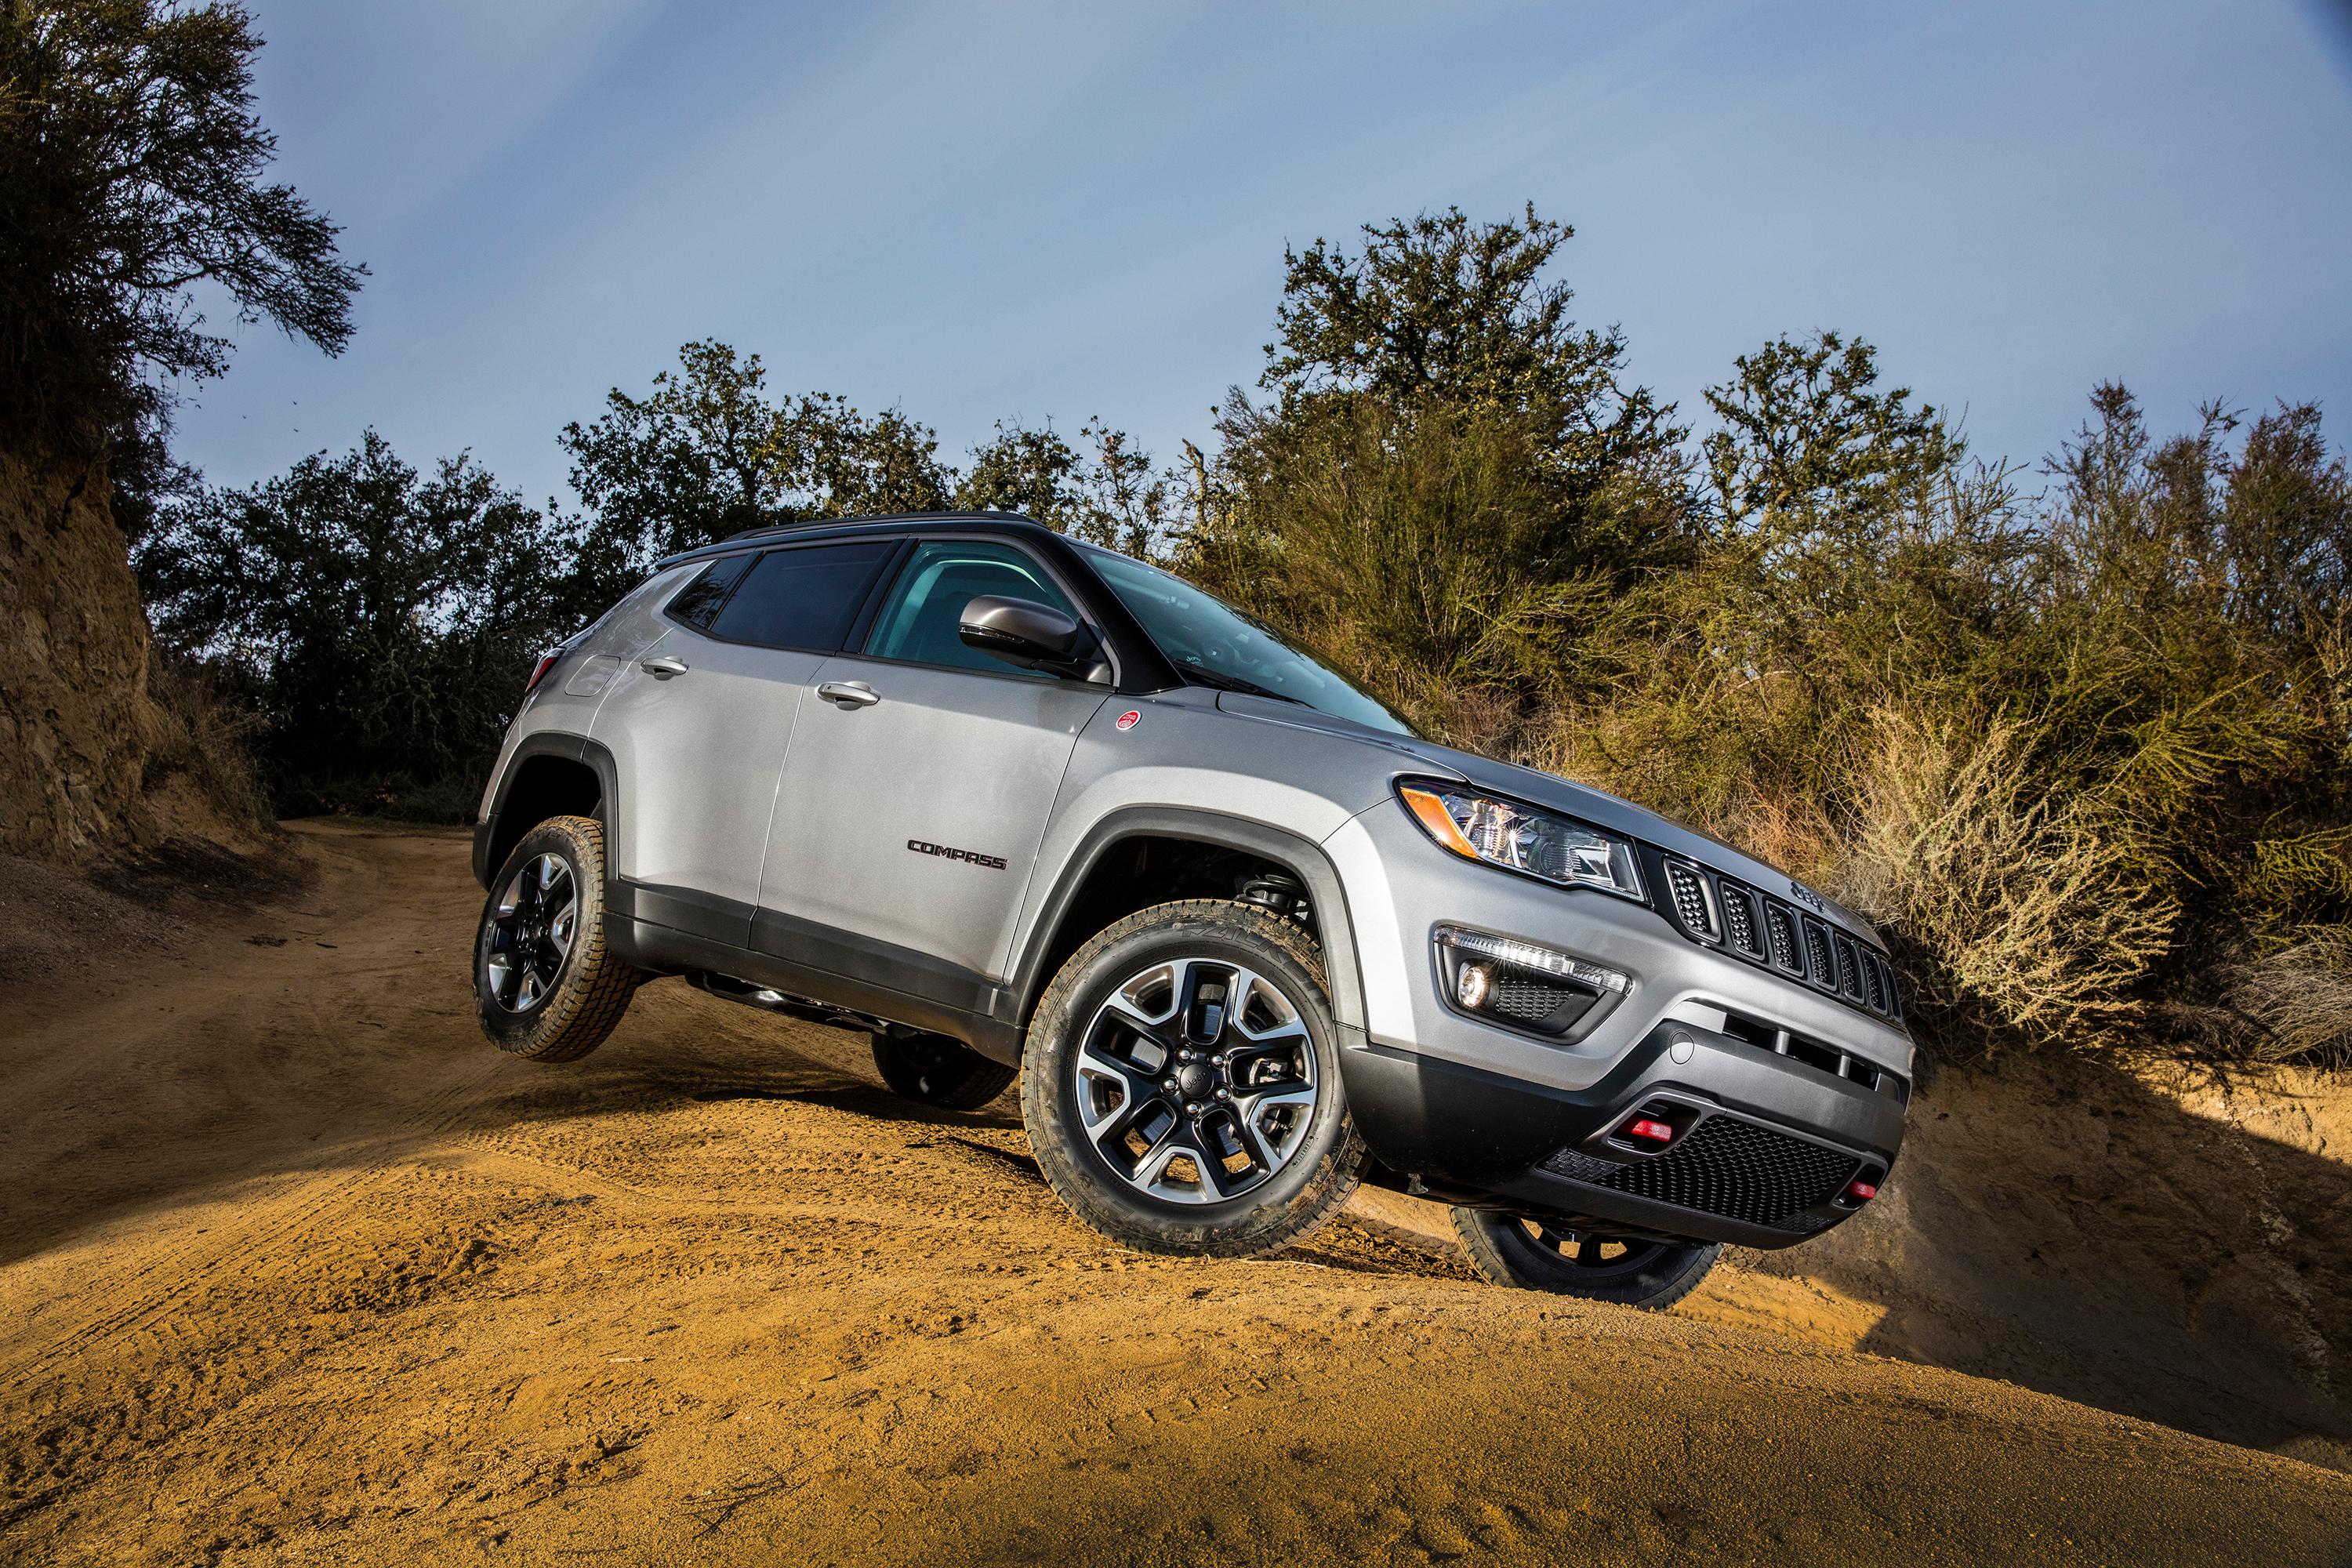 Jeep Compass 4k restyling